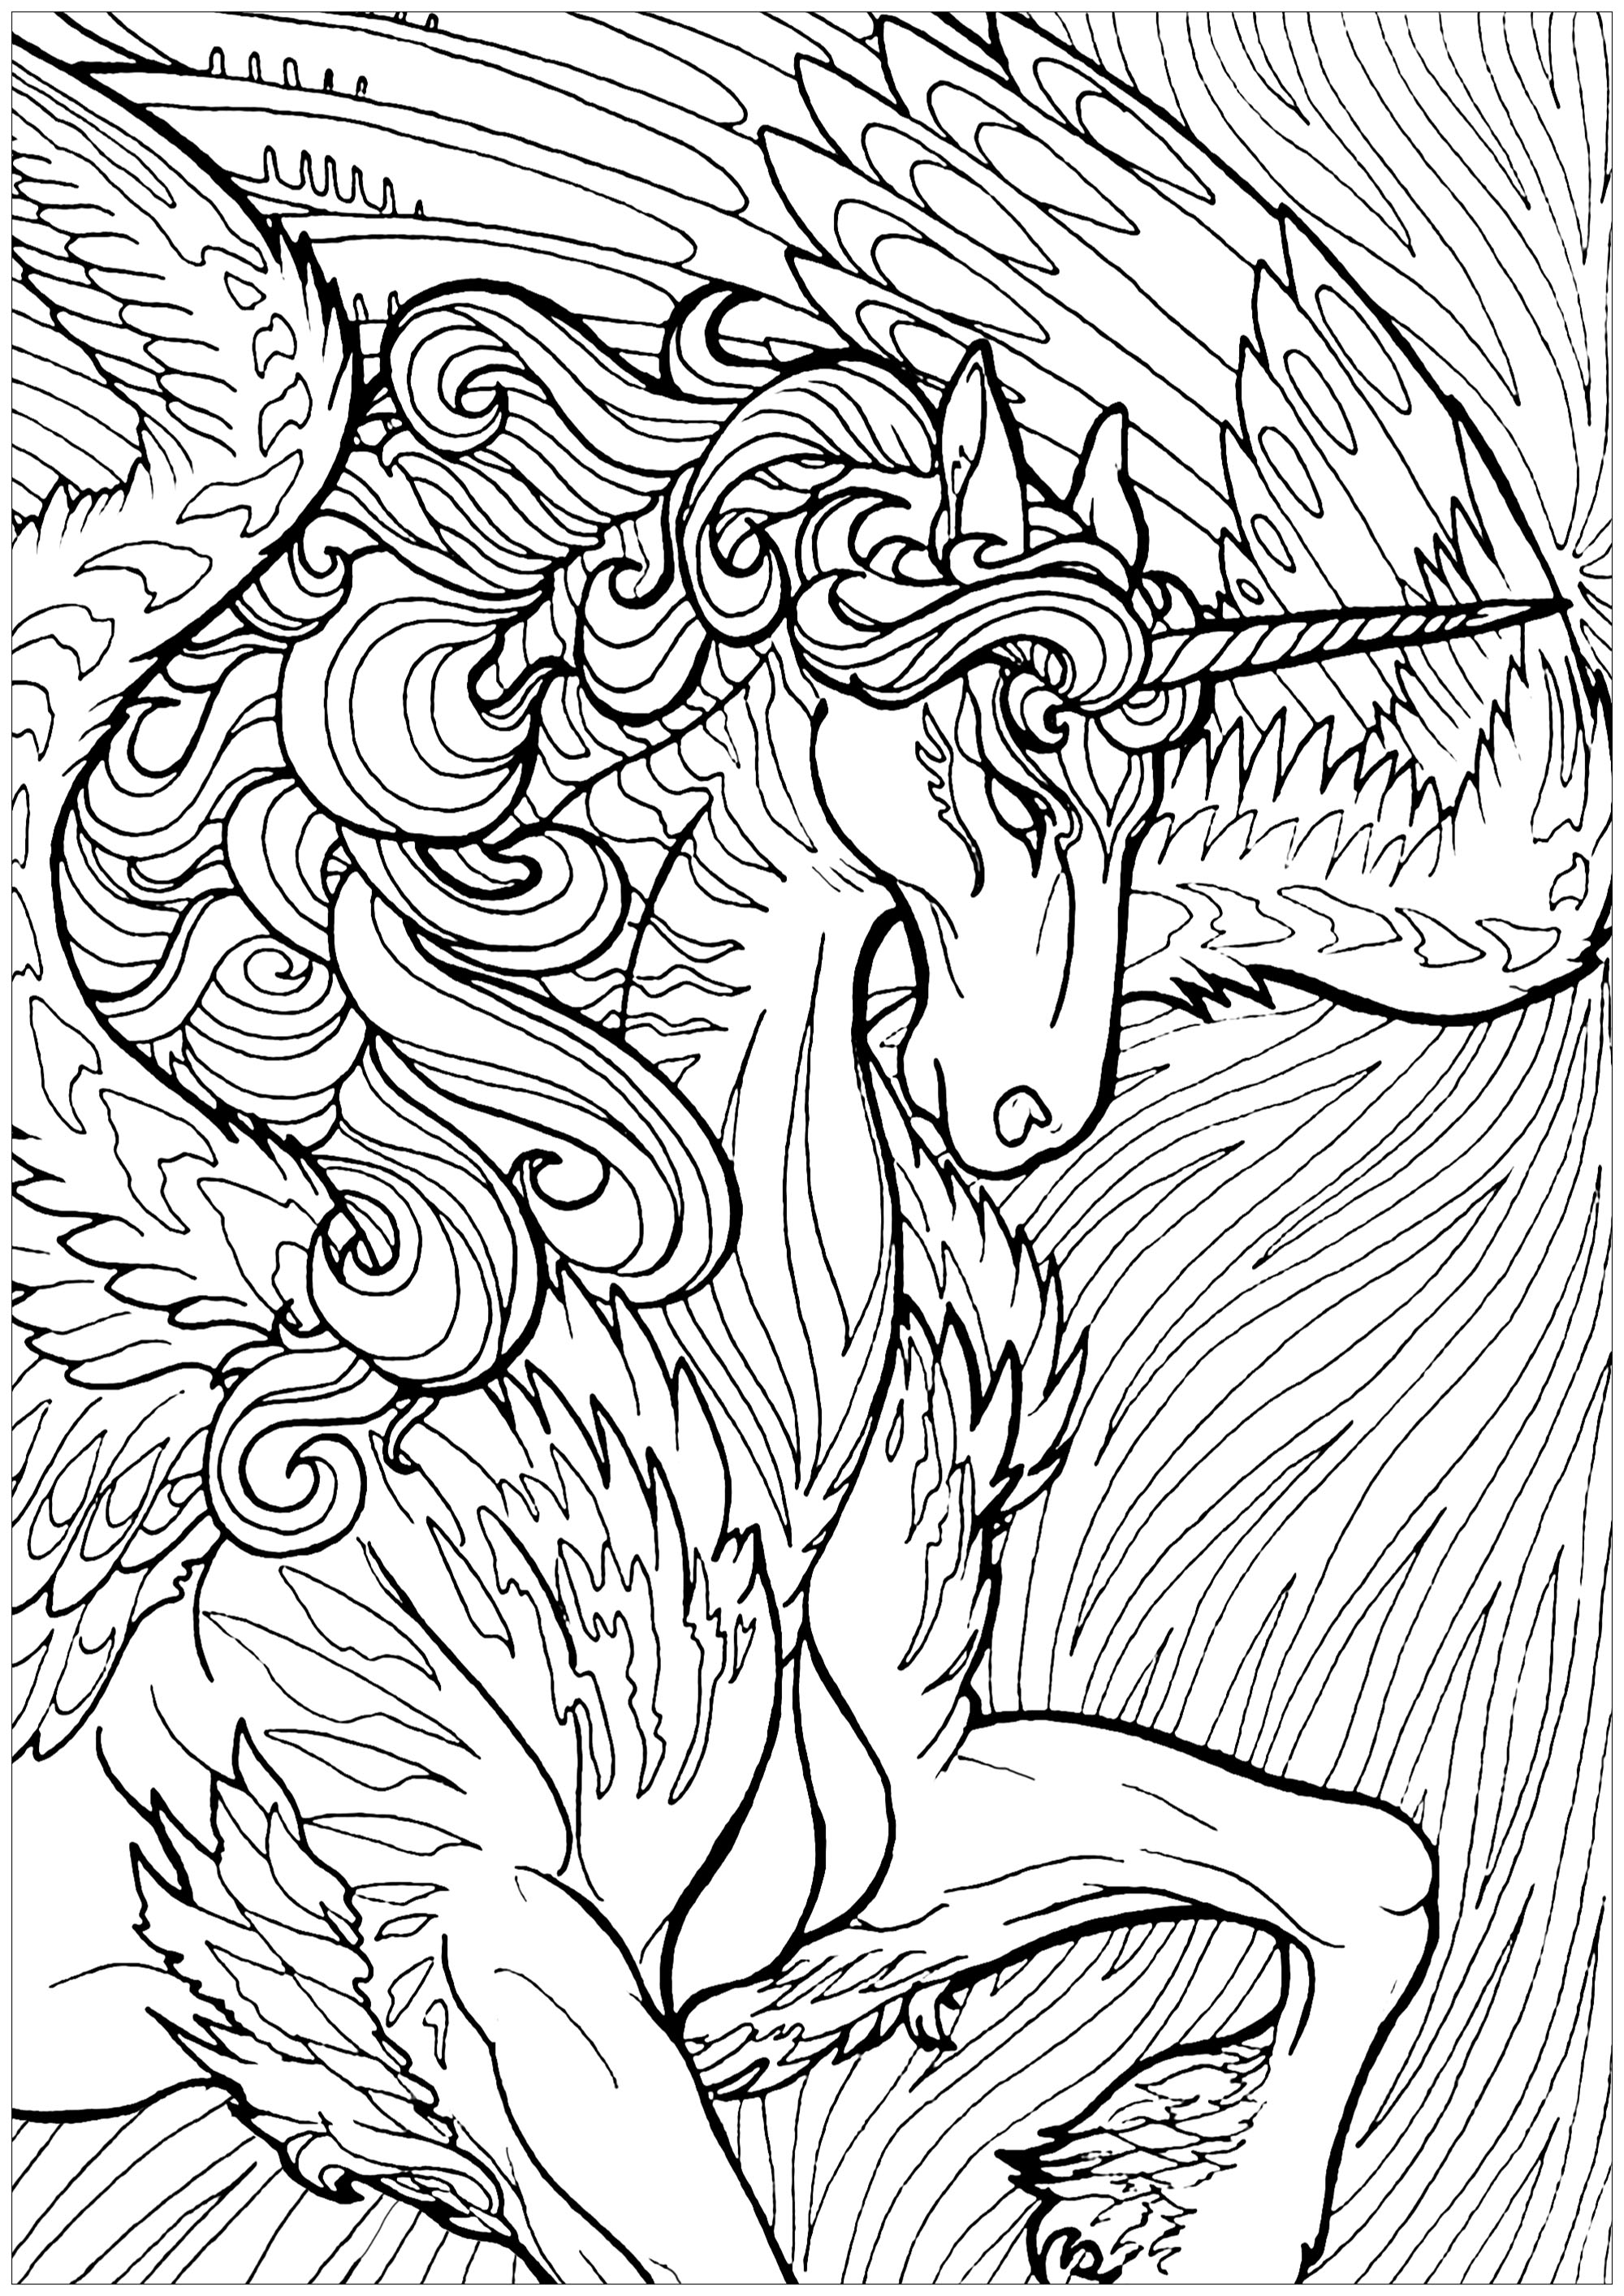 Unicorn with wings and background - Unicorns Adult Coloring Pages